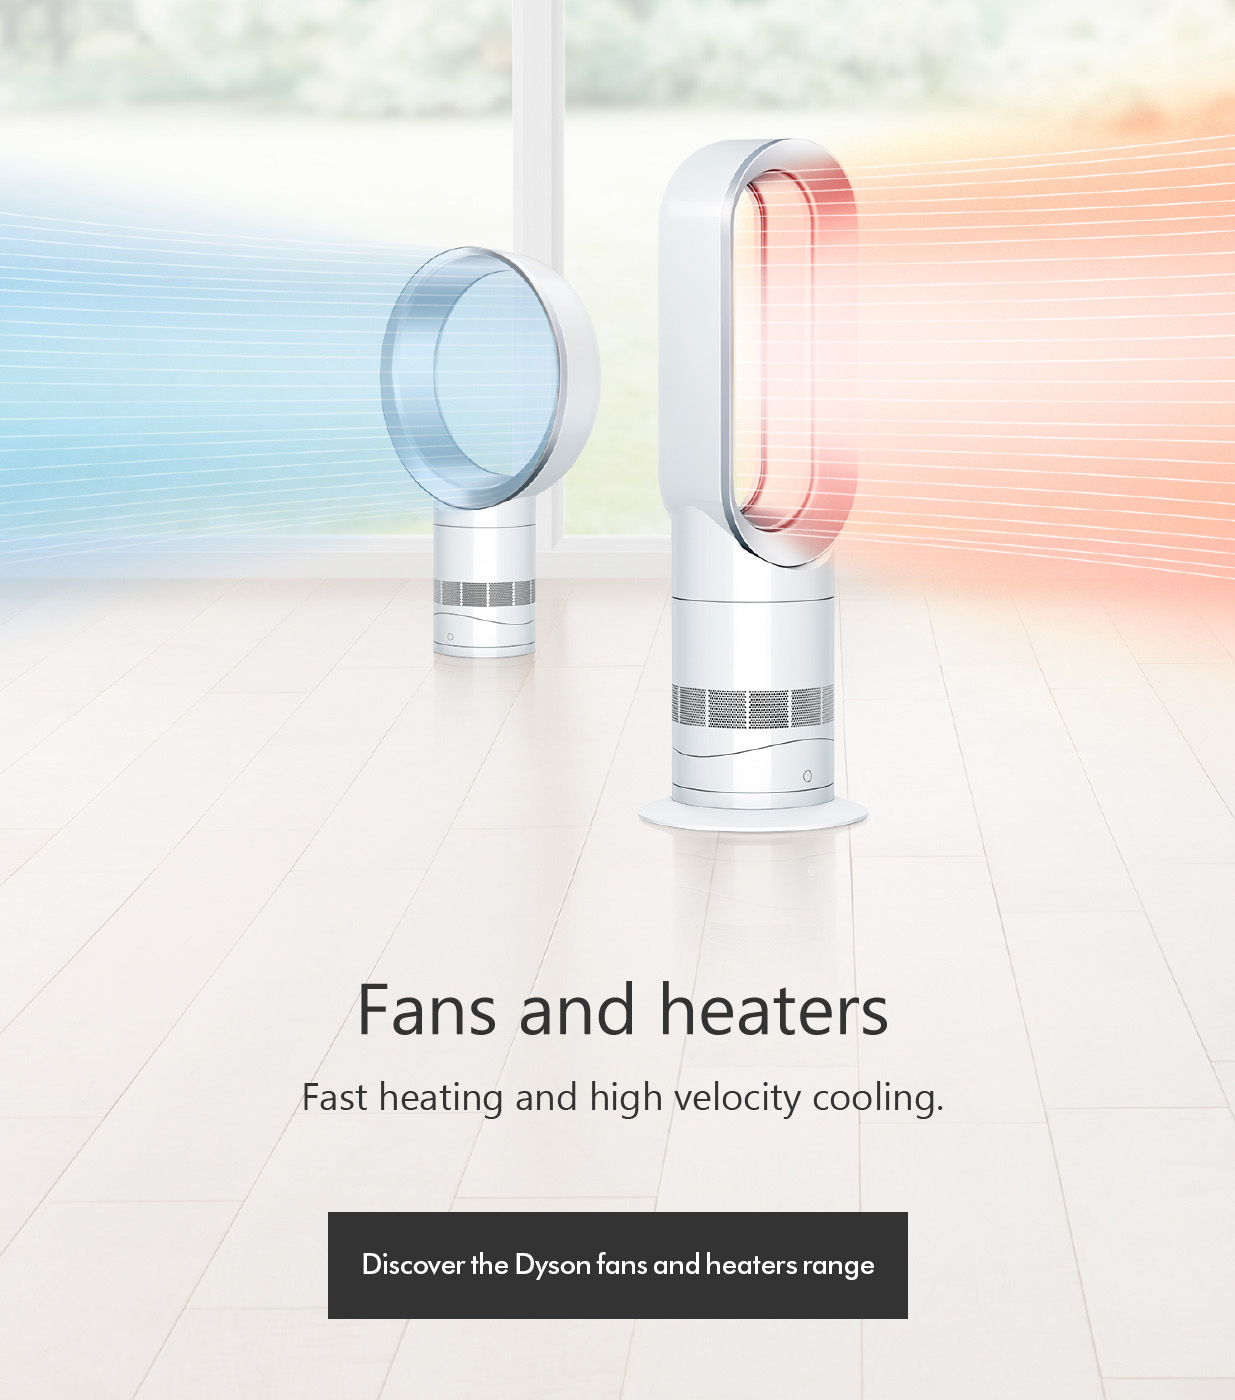 Dyson Air Treatment with Cooling and Heating at electricshop.com